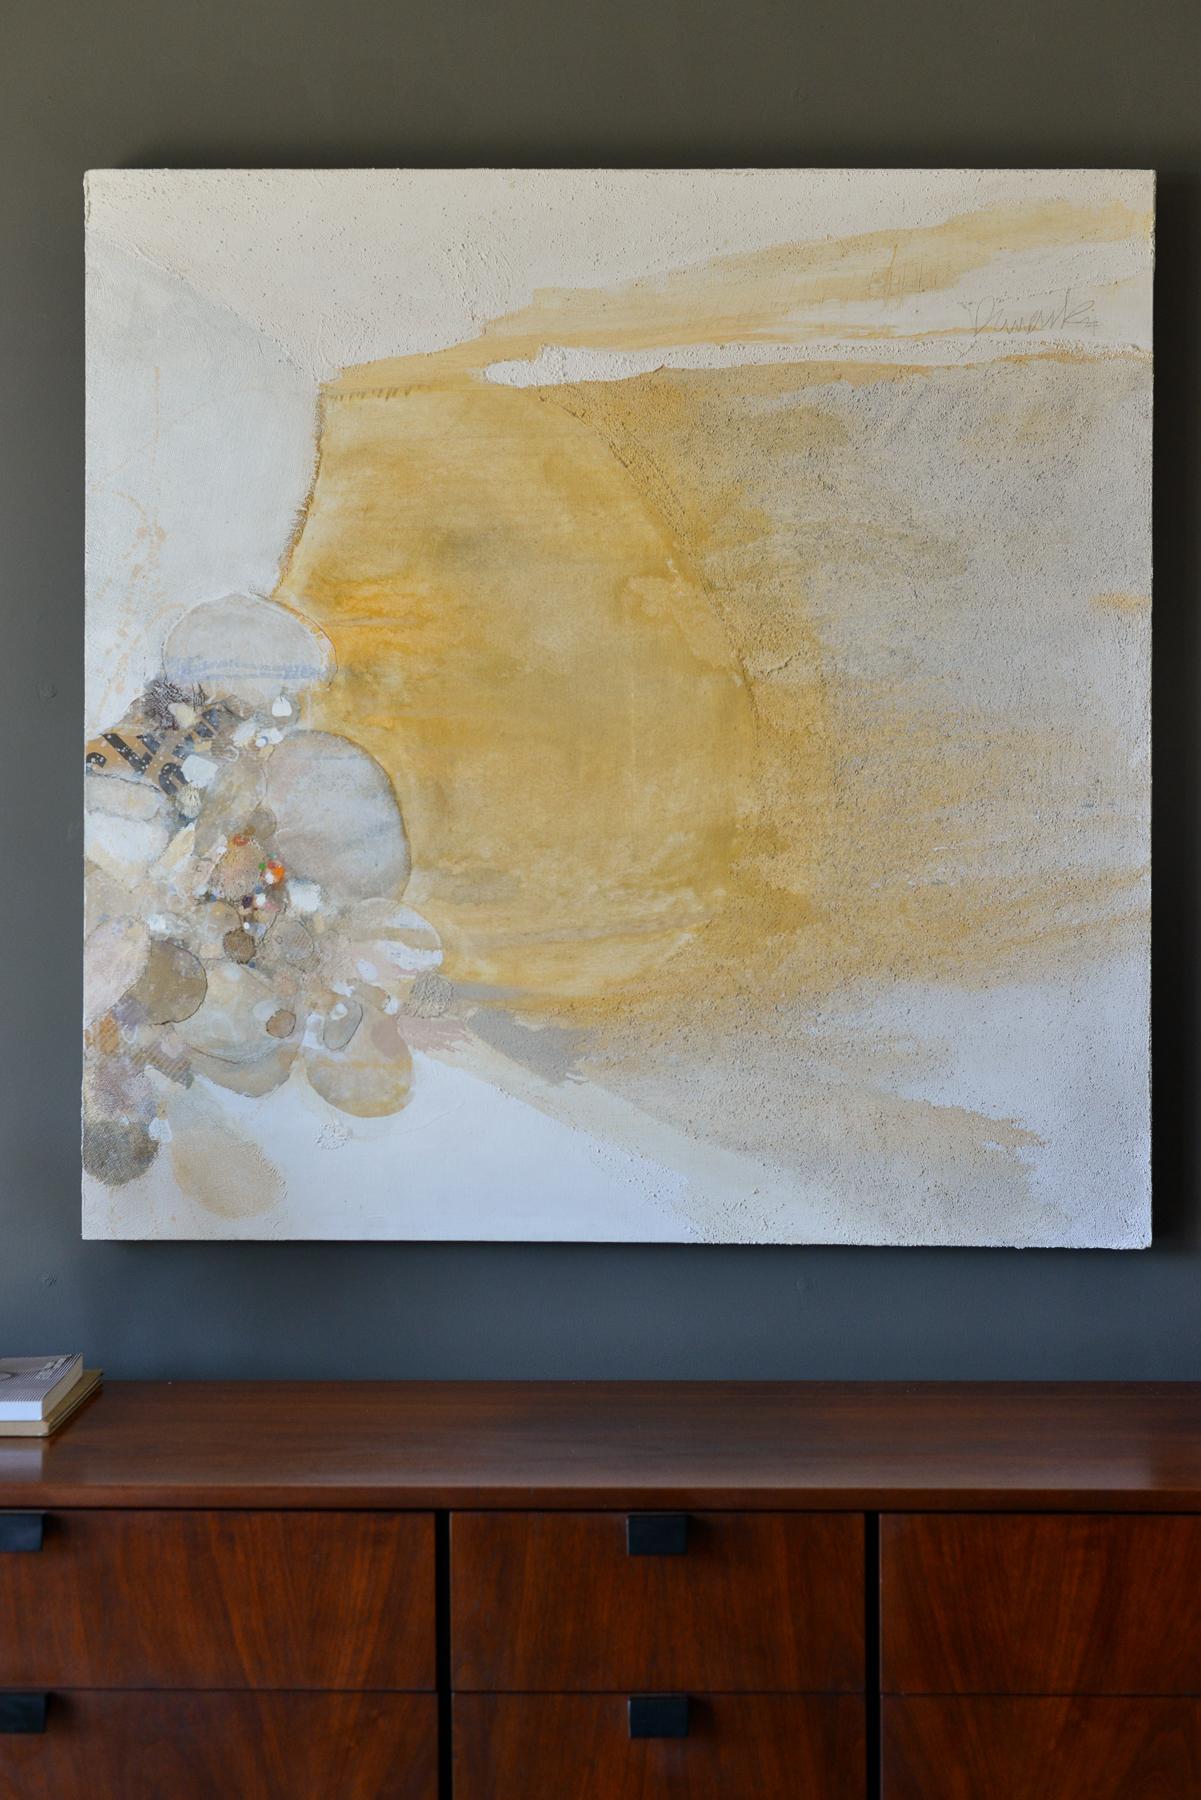 Mixed media on canvas by Artist/Designer Donald Damask, 1974. Original piece directly from the artists personal collection from his home in Newport Beach, CA. Great mixed media and tones, this beautiful piece is substantial measuring 44